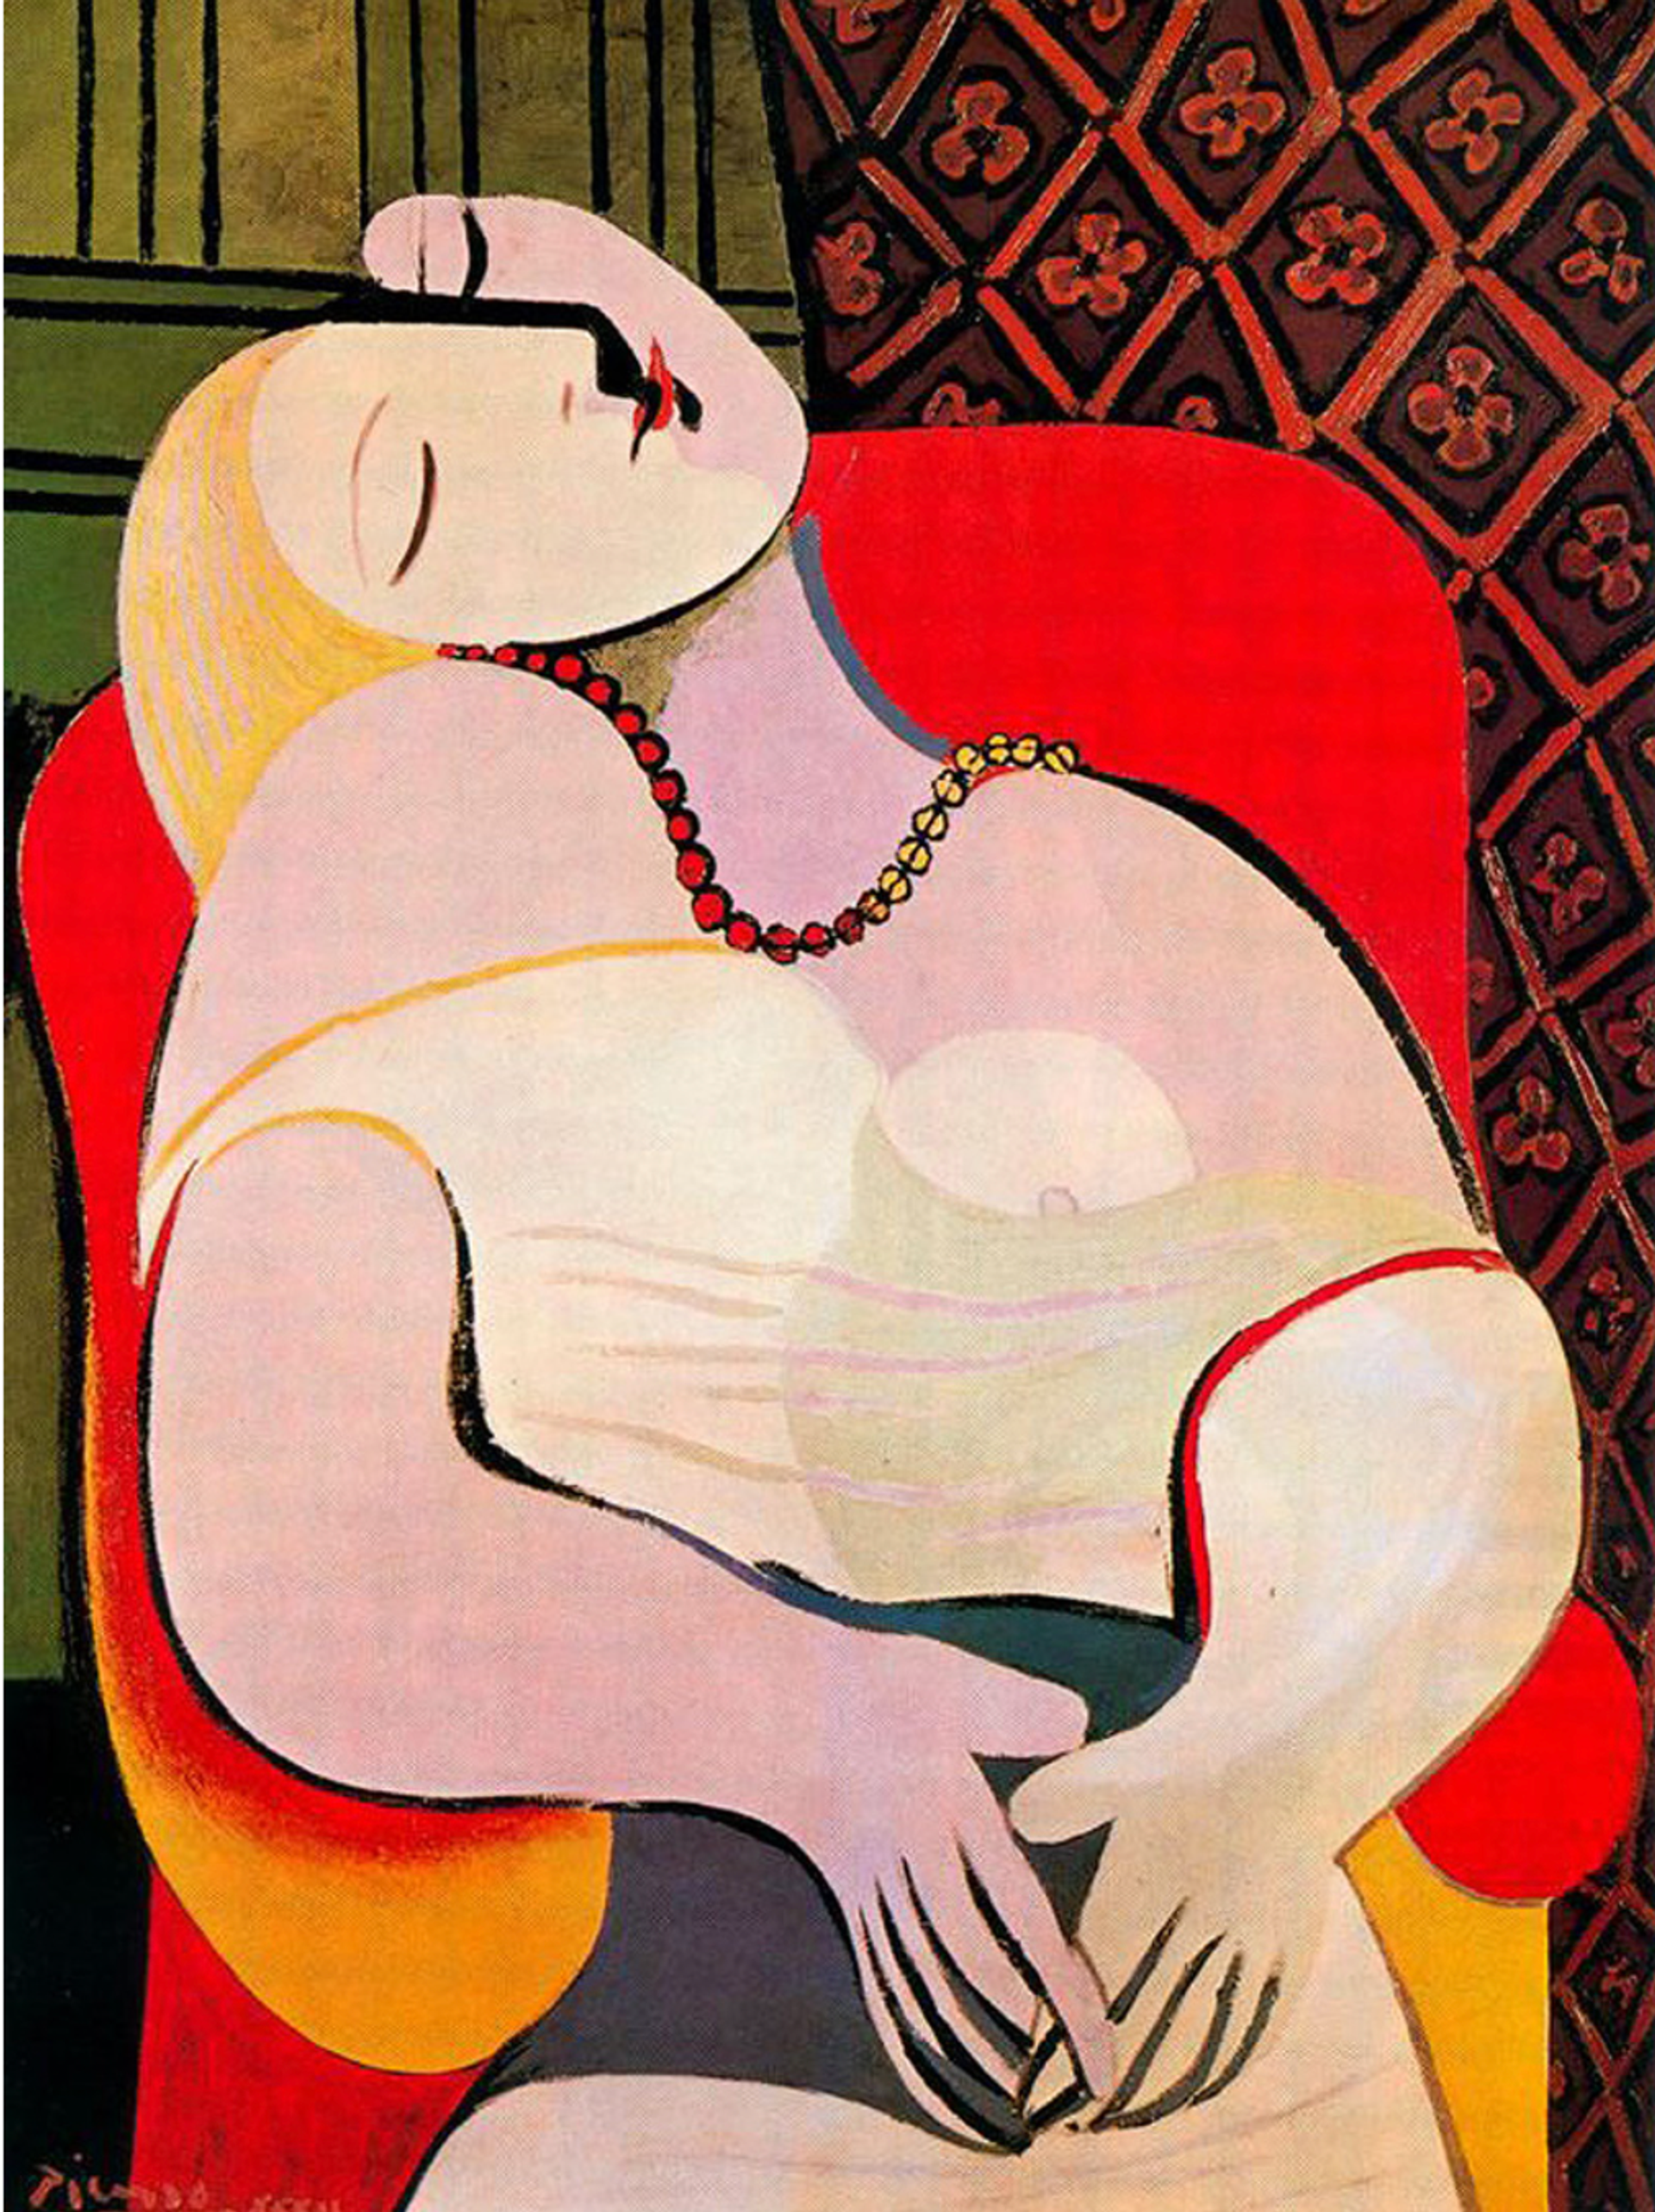 Painted portrait of Marie-Thérèse Walter by Picasso, Walter is depicted with voluptuous curves, in a seated position. The pale pink figure is sat on a orangey-red chair, against a backdrop of patterned red wallpaper.